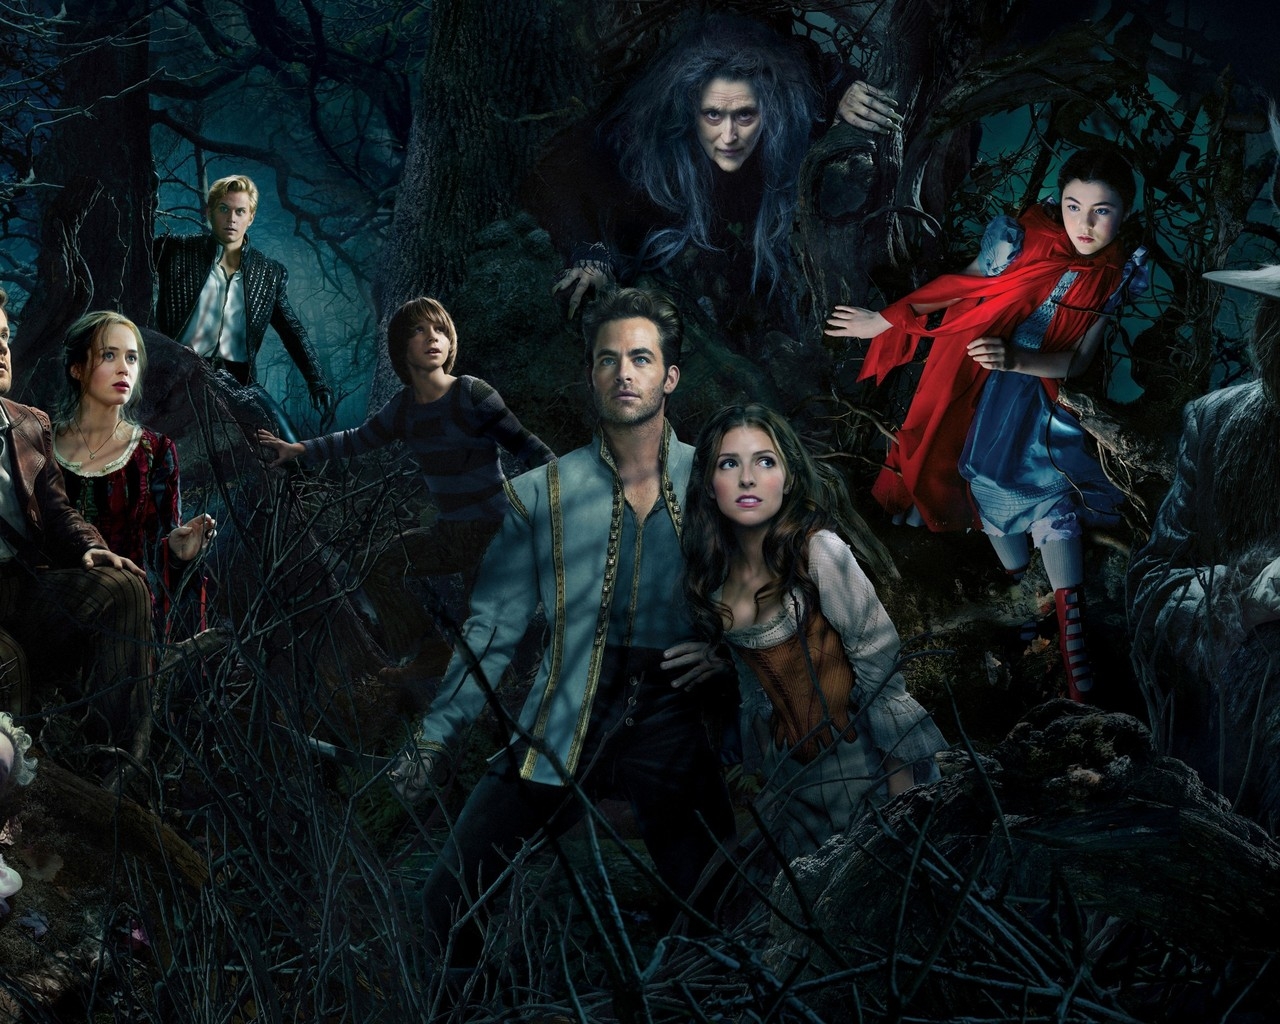 Into the Woods Poster for 1280 x 1024 resolution